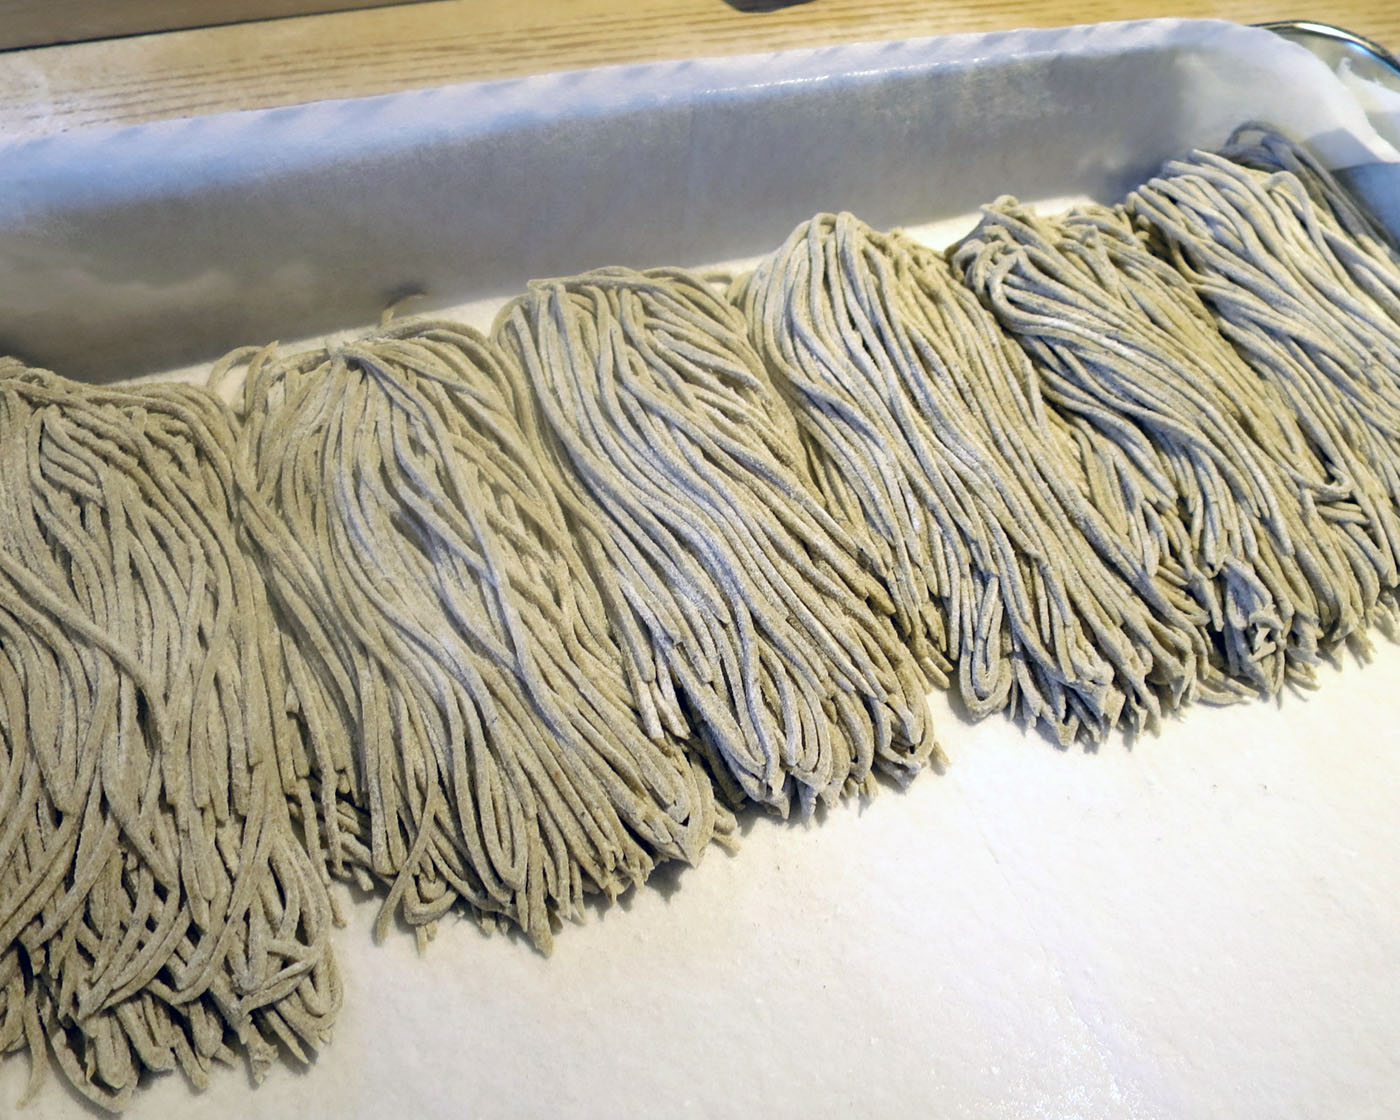 Soba noodle making and tasting with a master at a traditional Japanese restaurant